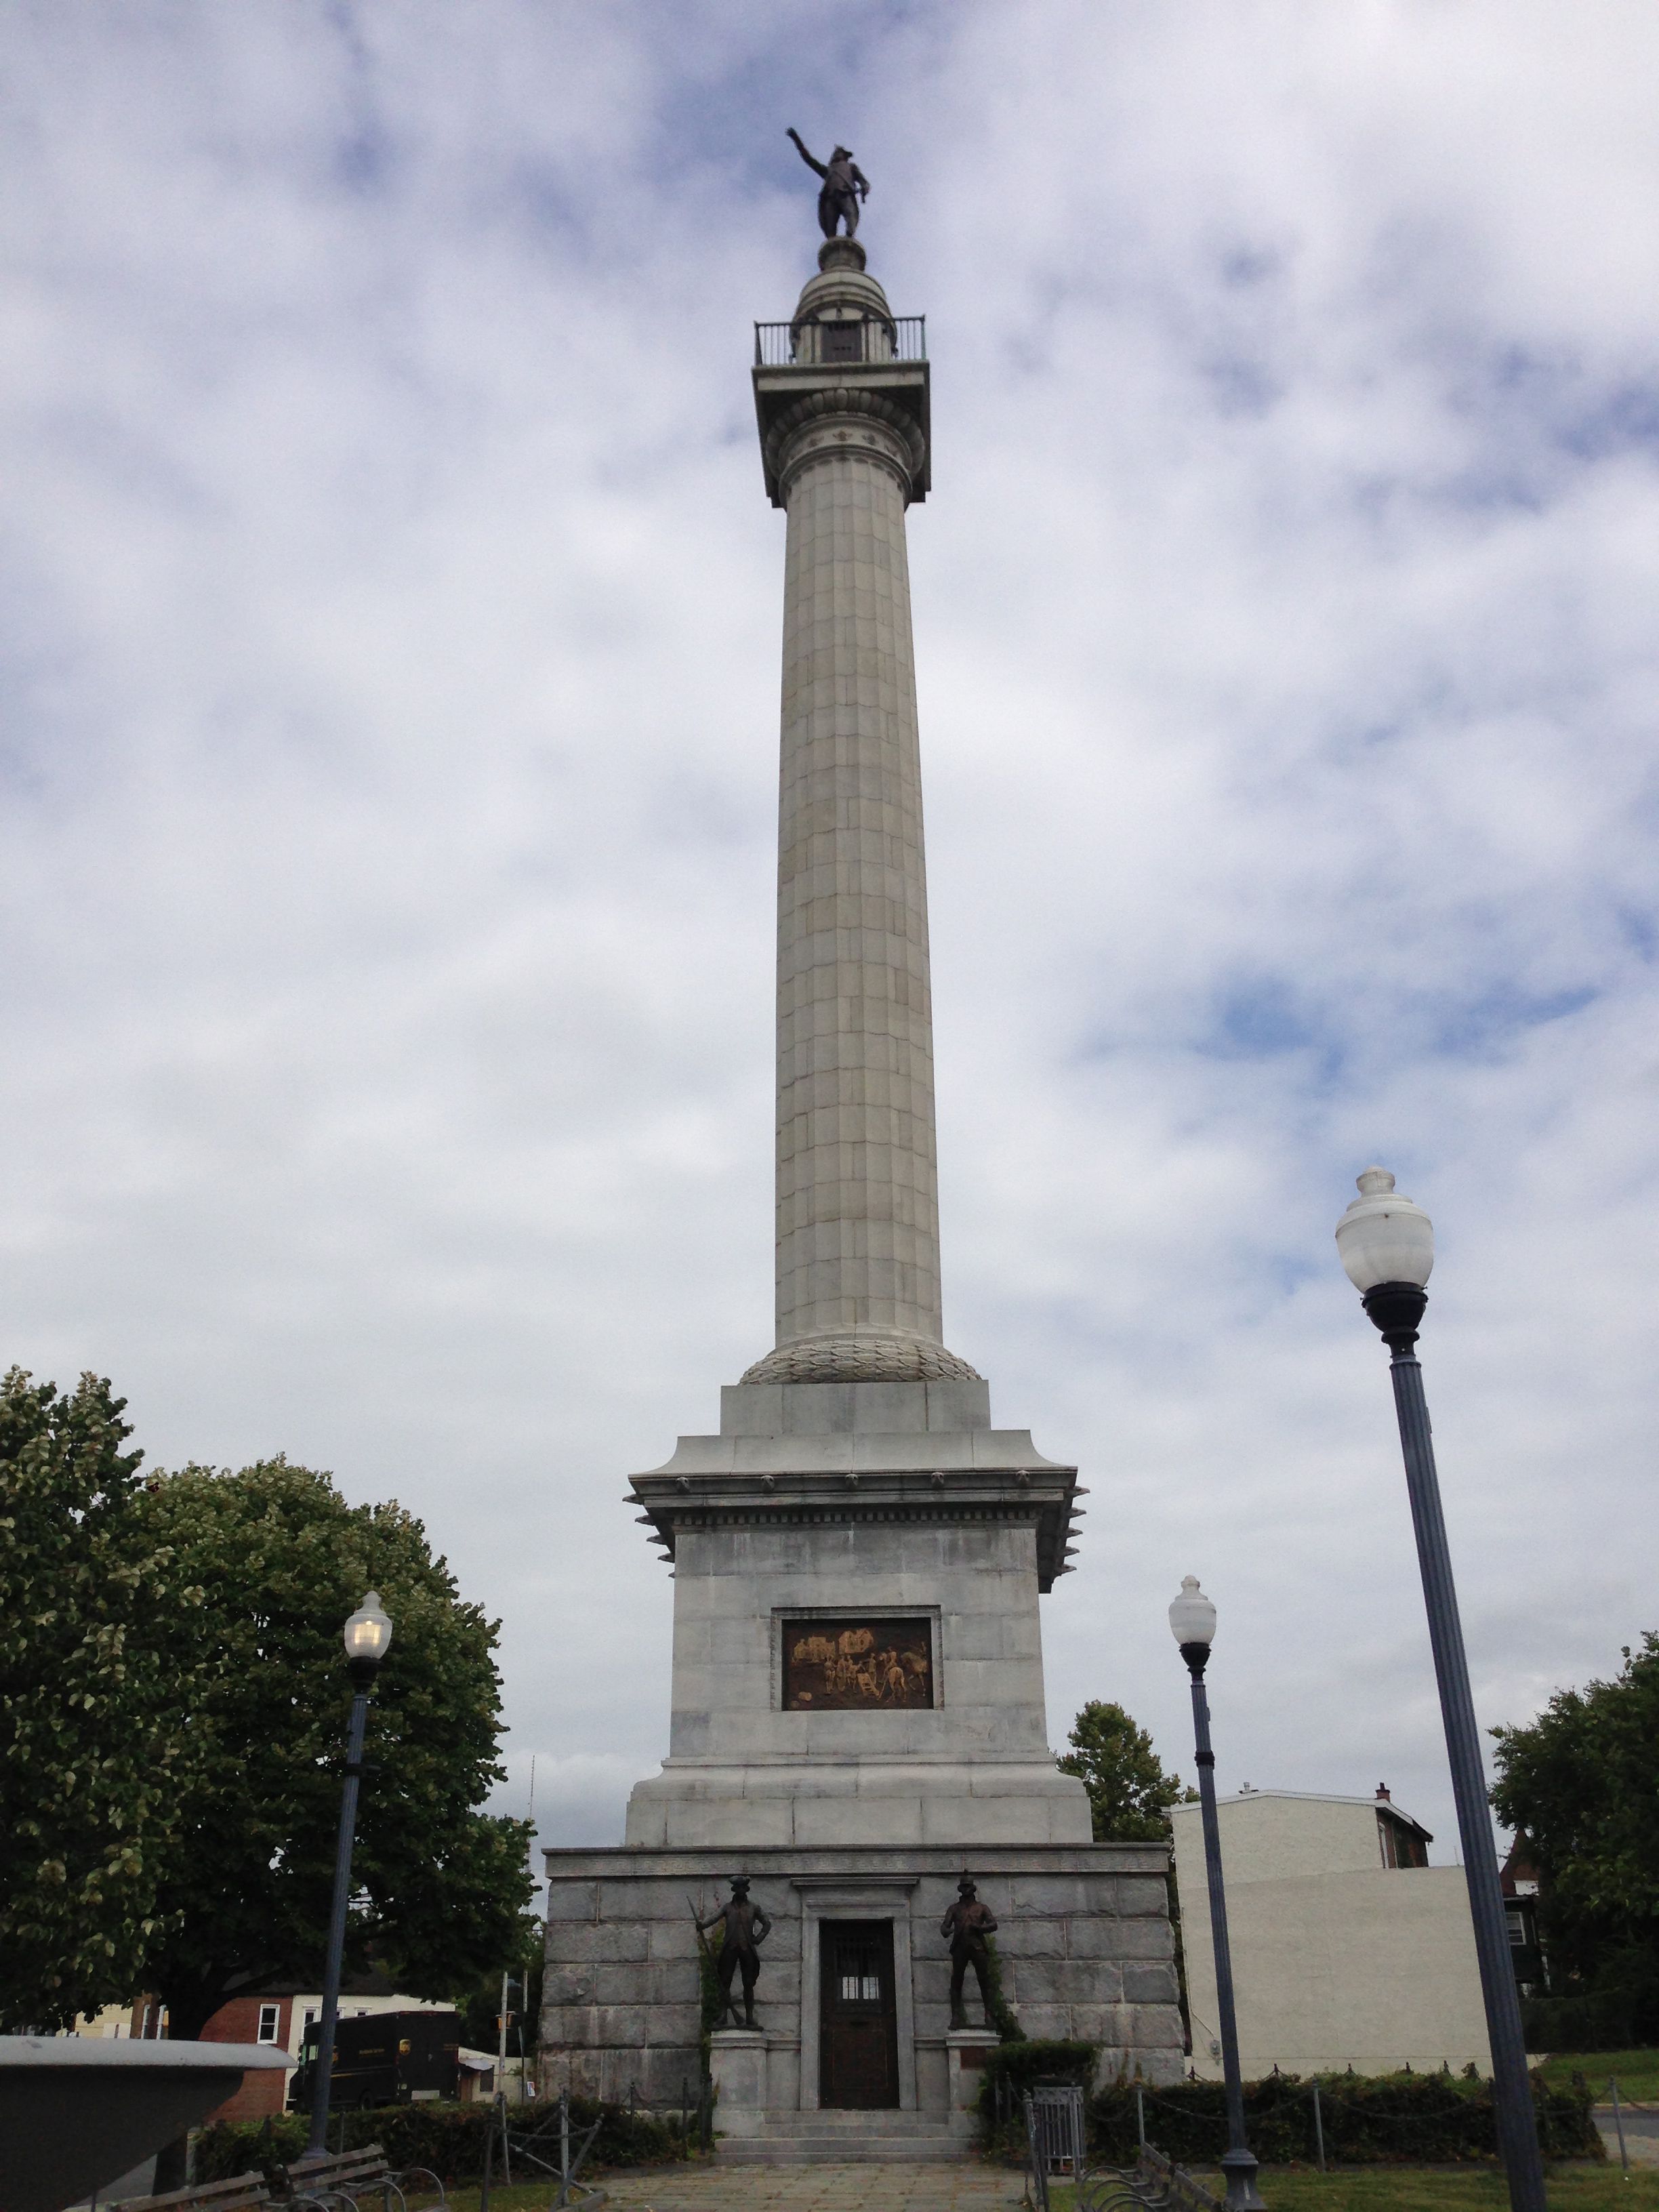 A view of the Trenton Battle Monument